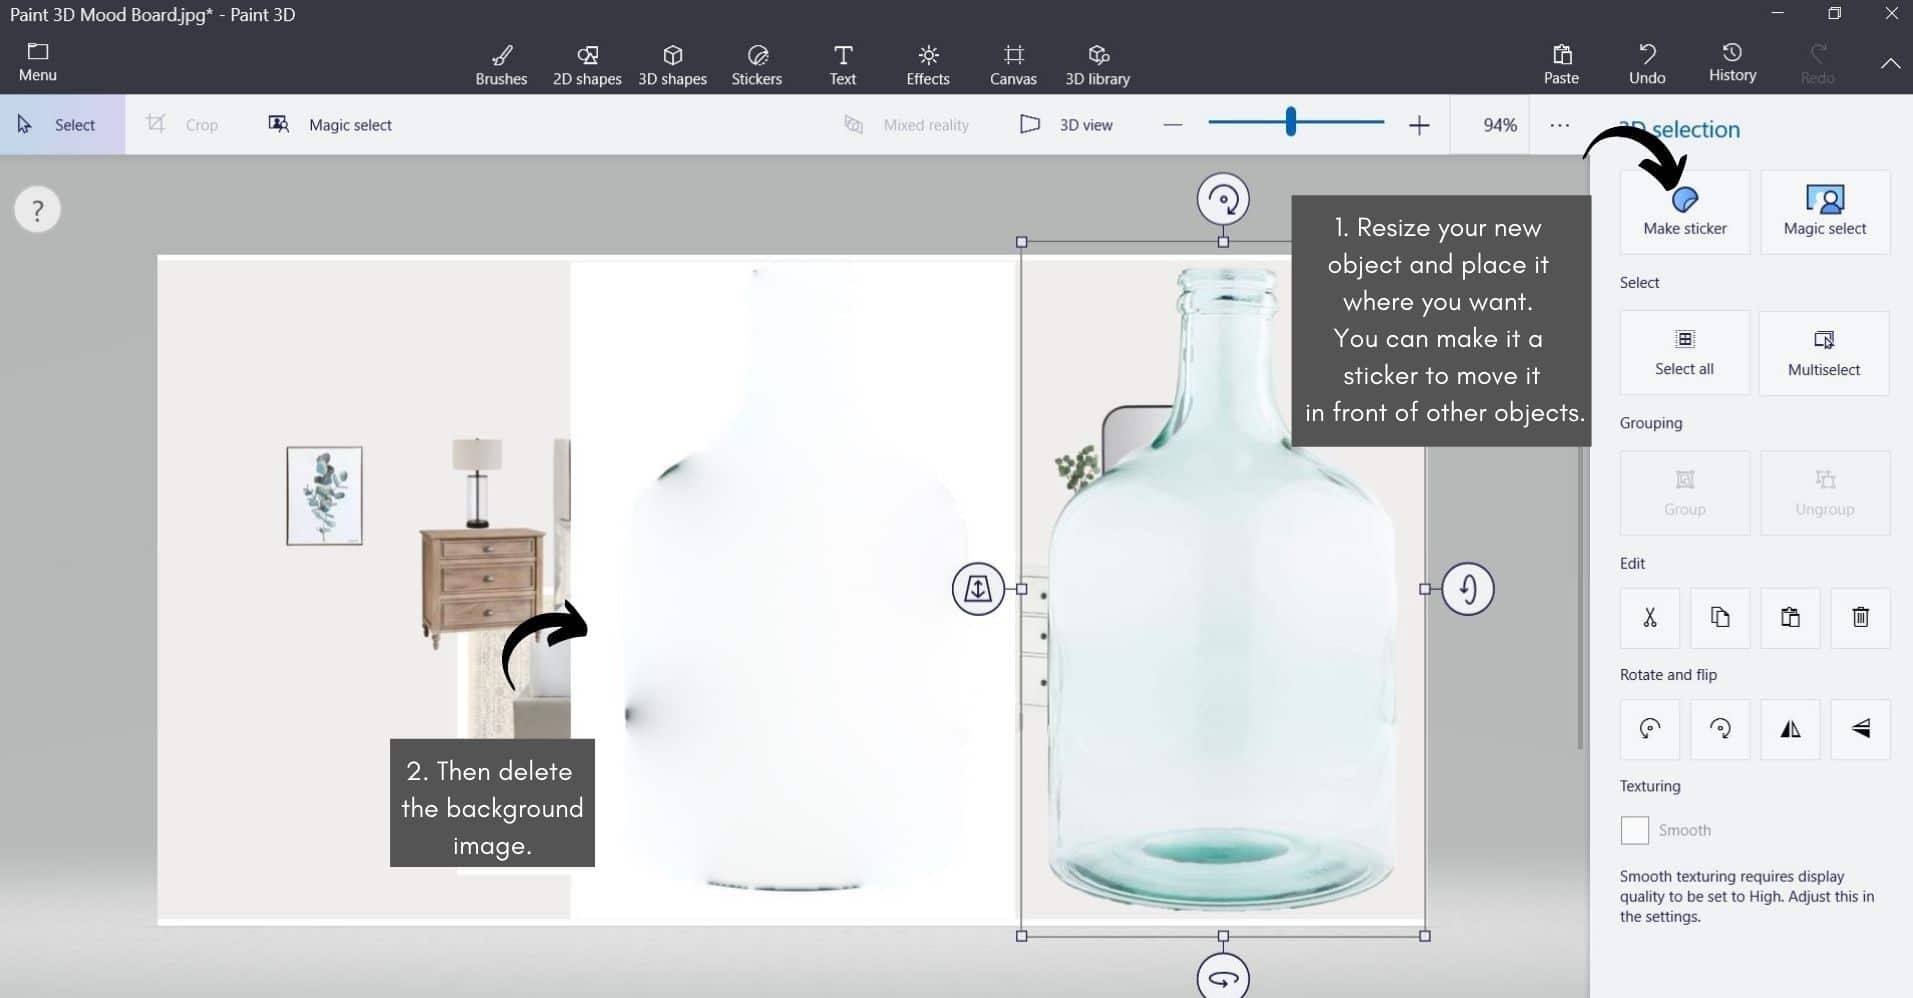 HOW To Create A Paint 3D Mood Board 